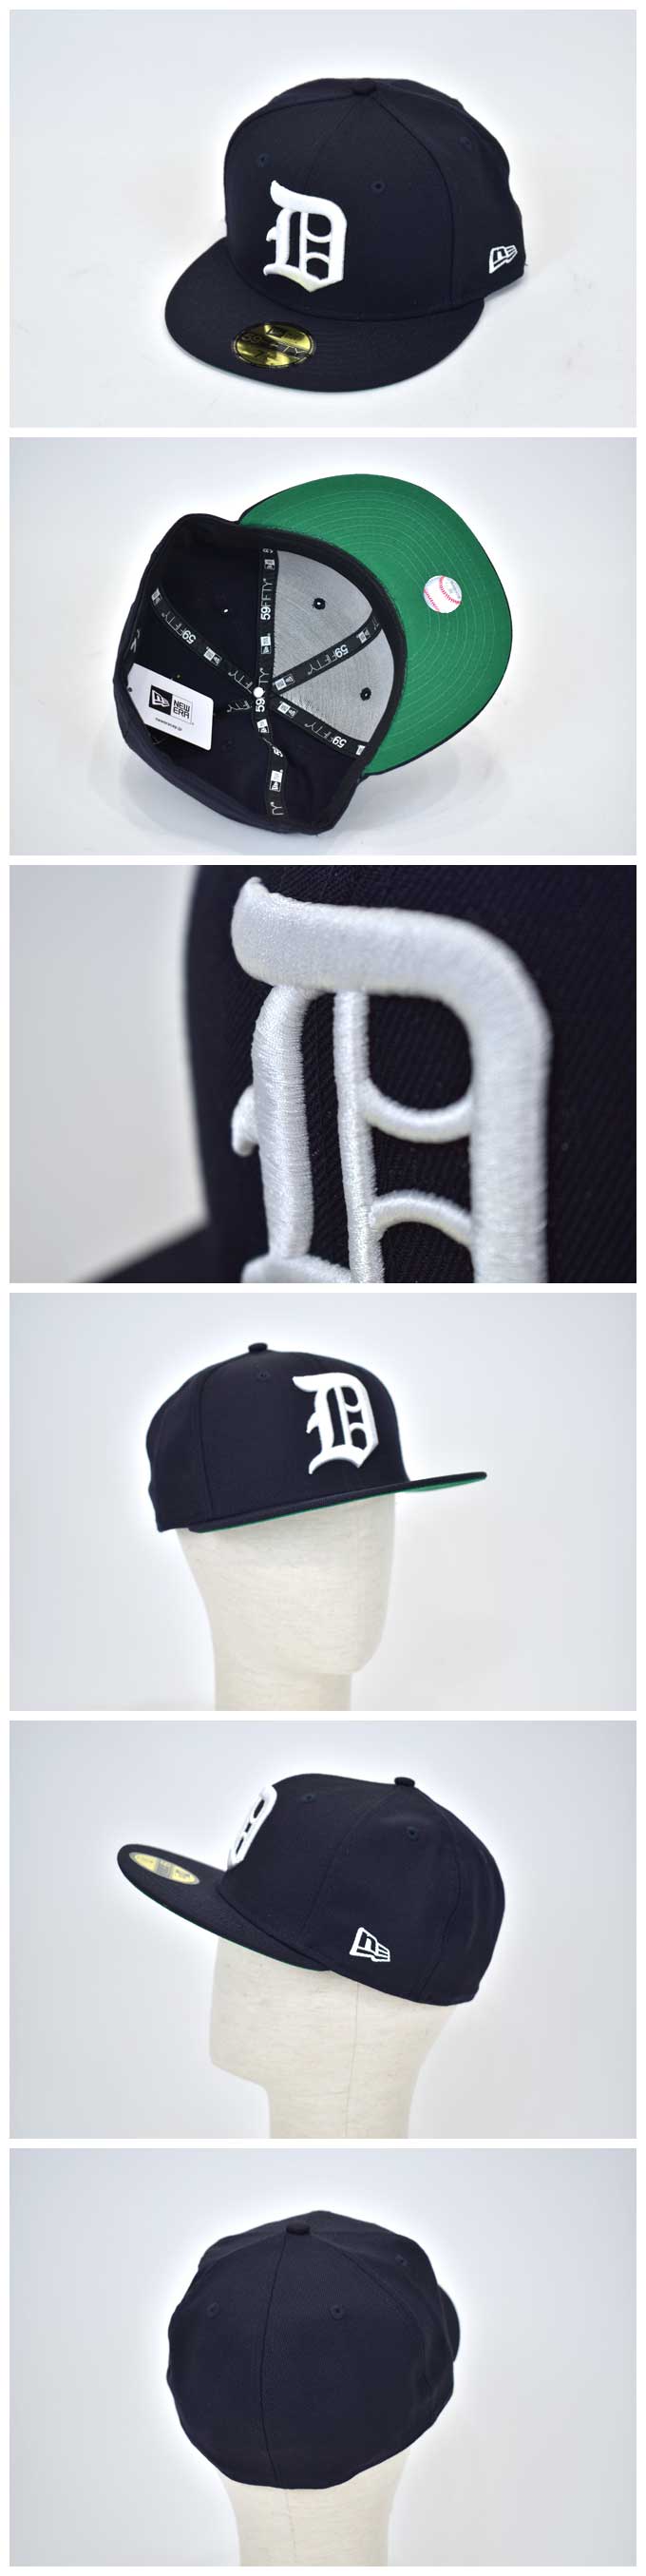 NEW ERA #11347475(Cooperstown Collection 59FIFTY)